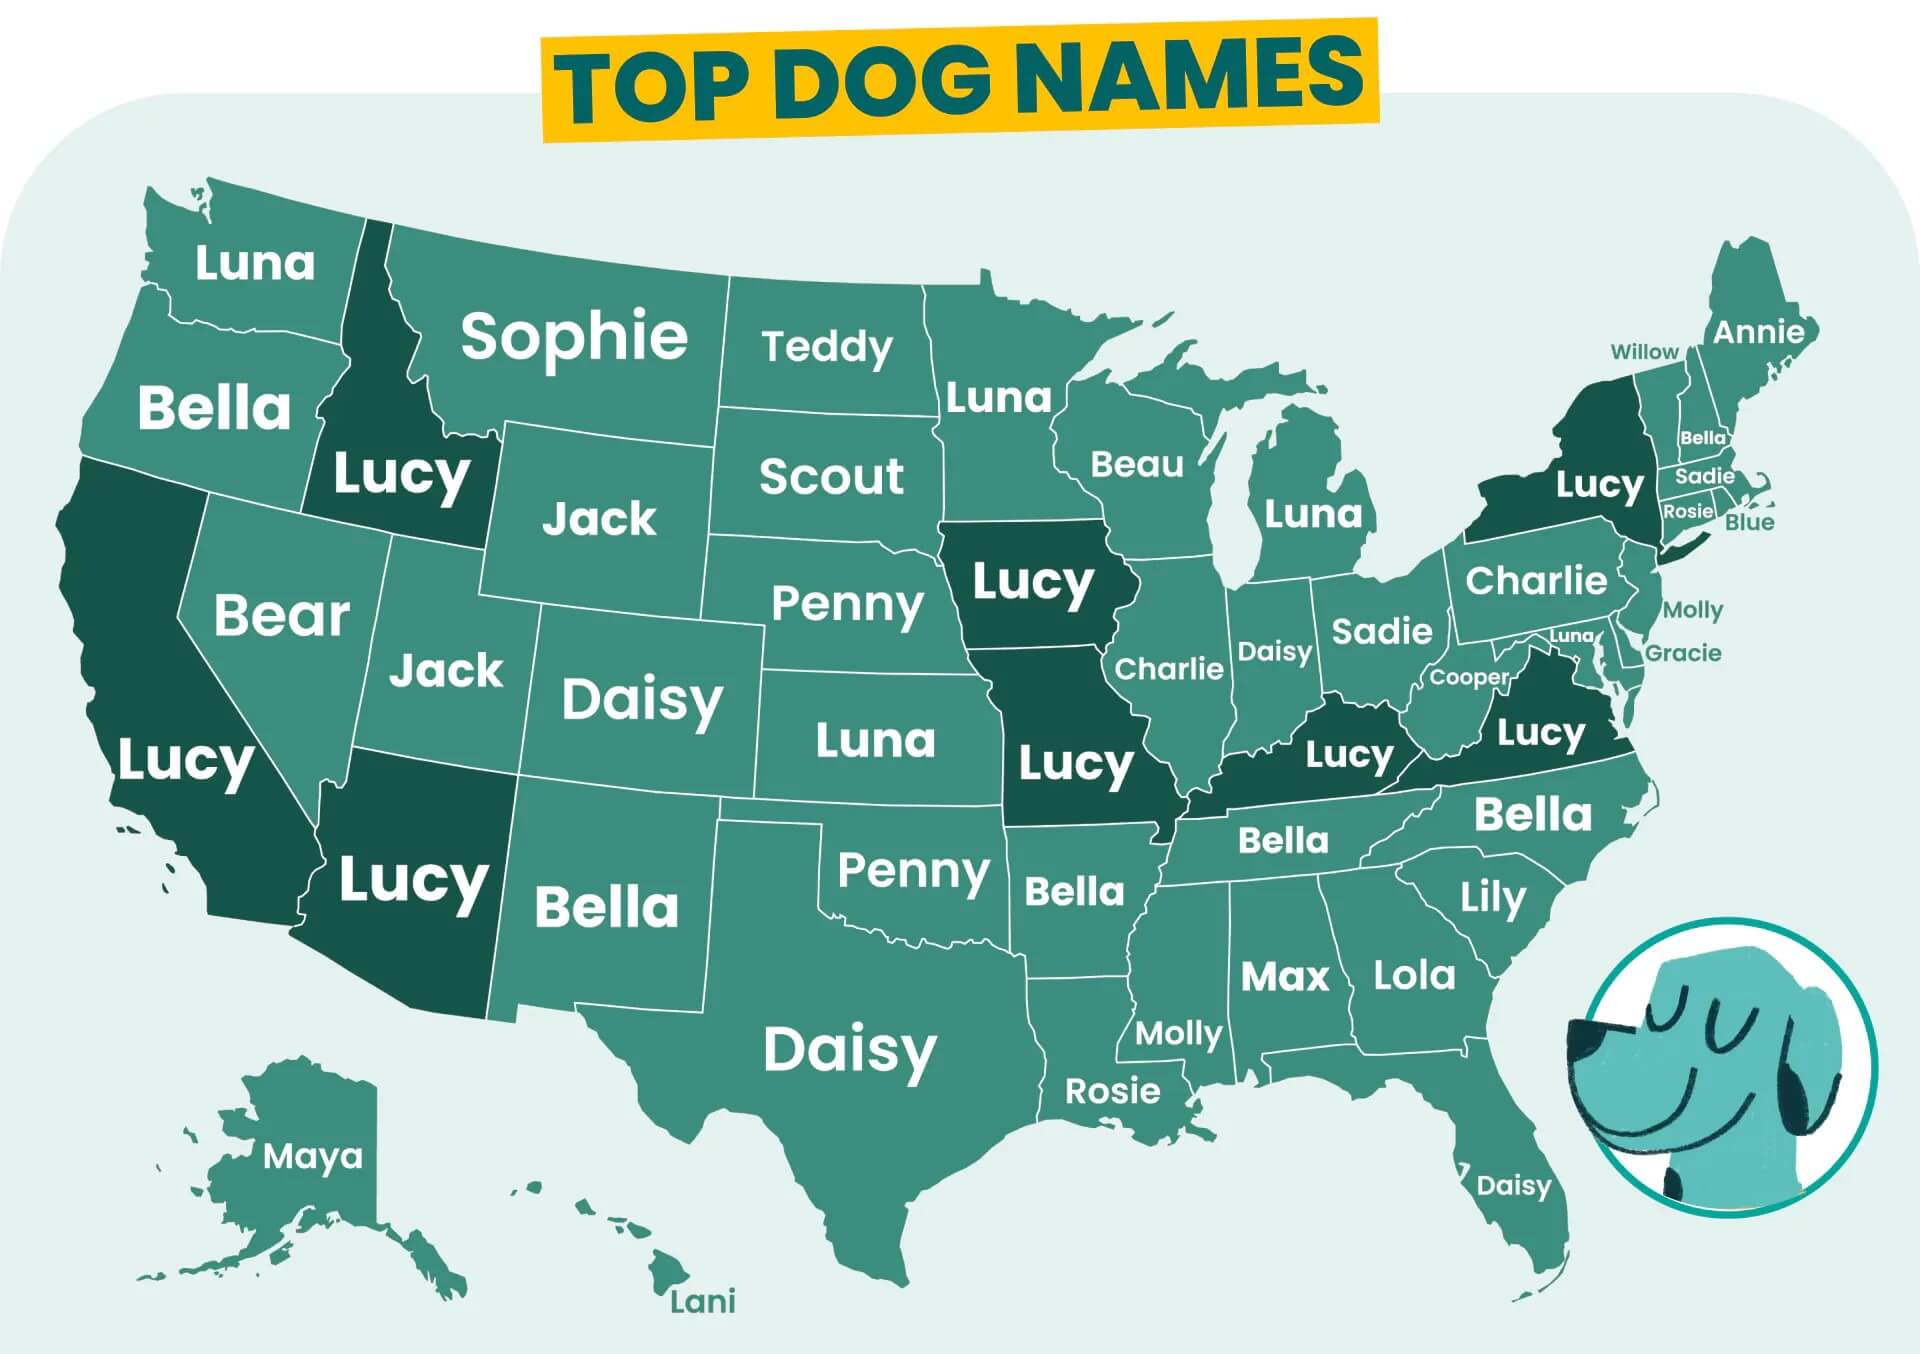 Dog names by state